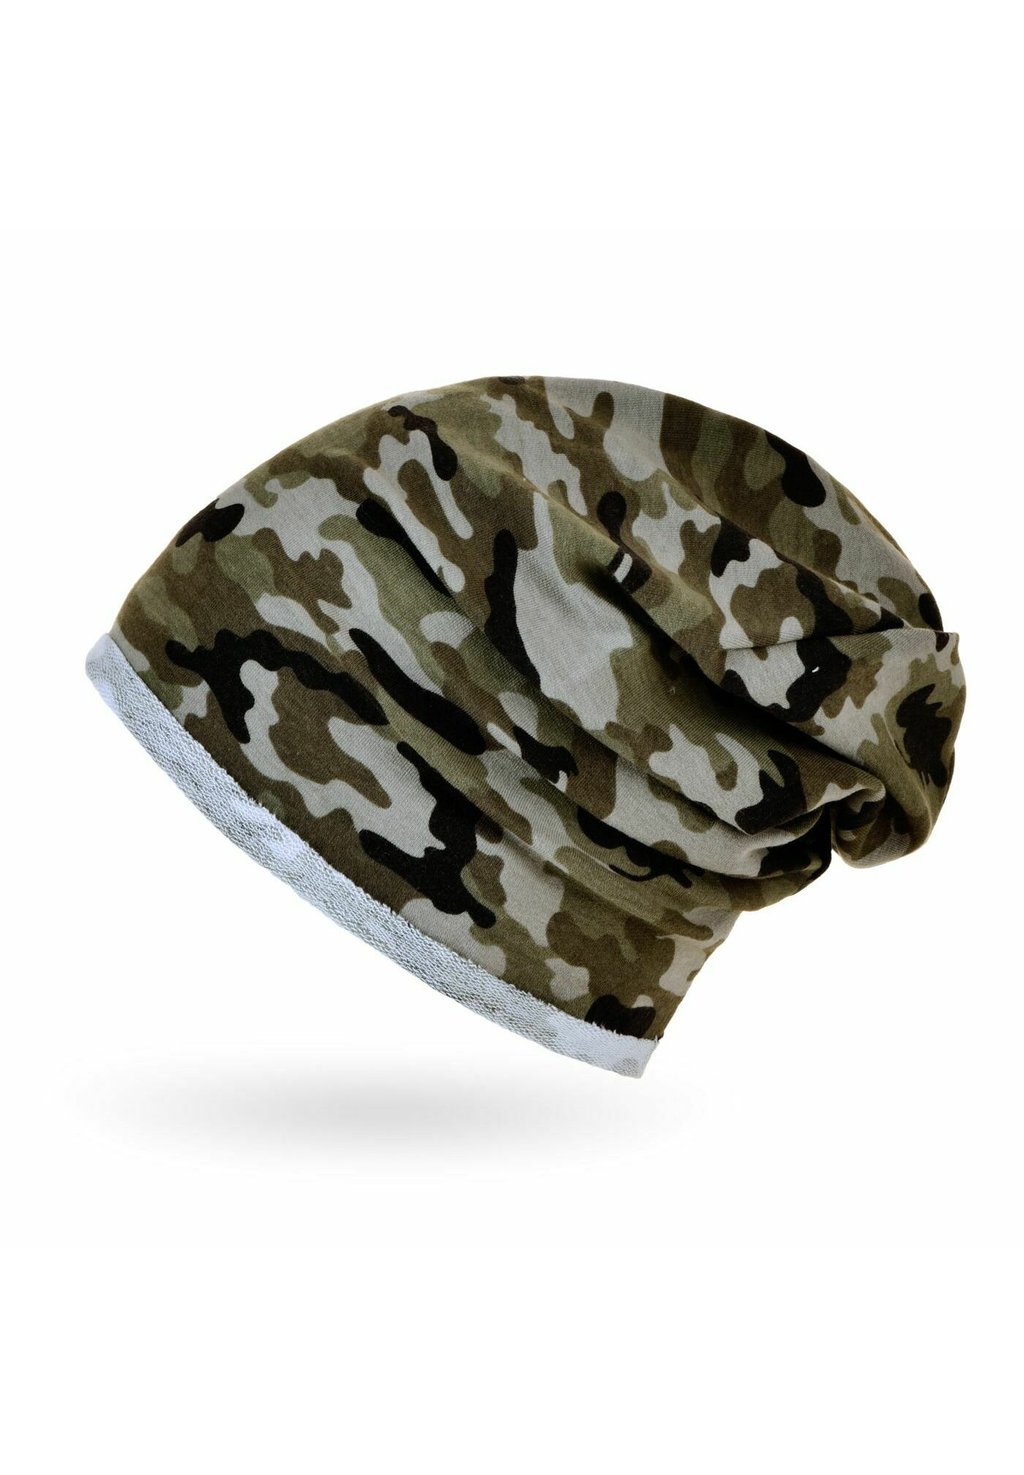 Шапка CAMOFLAGE CAMO-MUSTER SLOUCH OVERSIZED OUTDO Neverless, цвет army hell